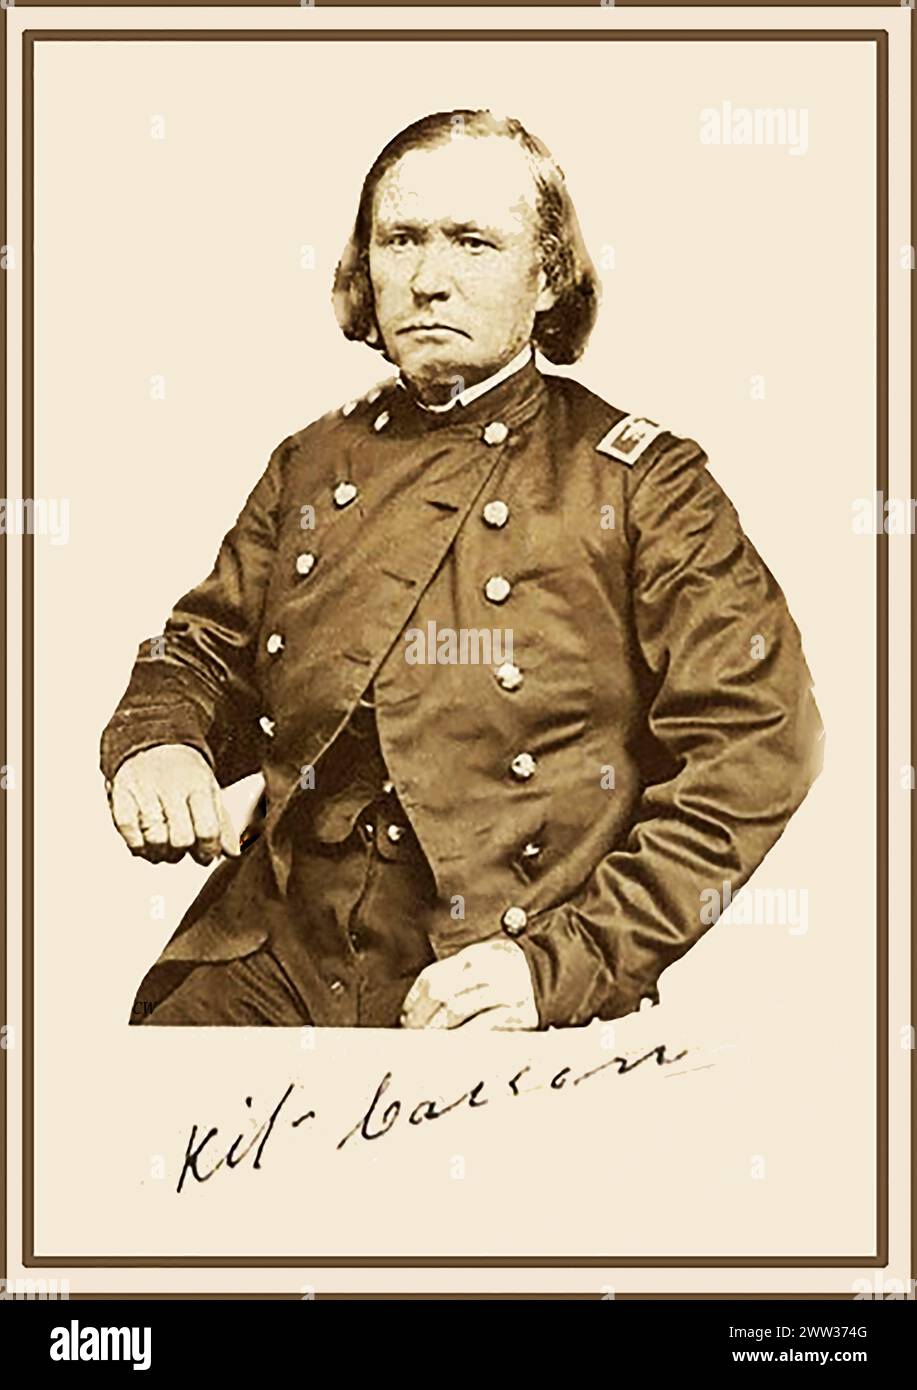 U.S. Pioneer and army scout  Kit Carson in his army uniform. Christopher Houston Carson1809 – 868) was an American frontiersman, a fur trapper, Indian agent, wilderness guide, and U.S. Army officer who became a legend in his own lifetime. He notoriously   led forces to suppress  many Indian tribes  tribes by destroying their food sources.  He was briefly Brigadier General and took command of Fort Garland, Colorado Stock Photo